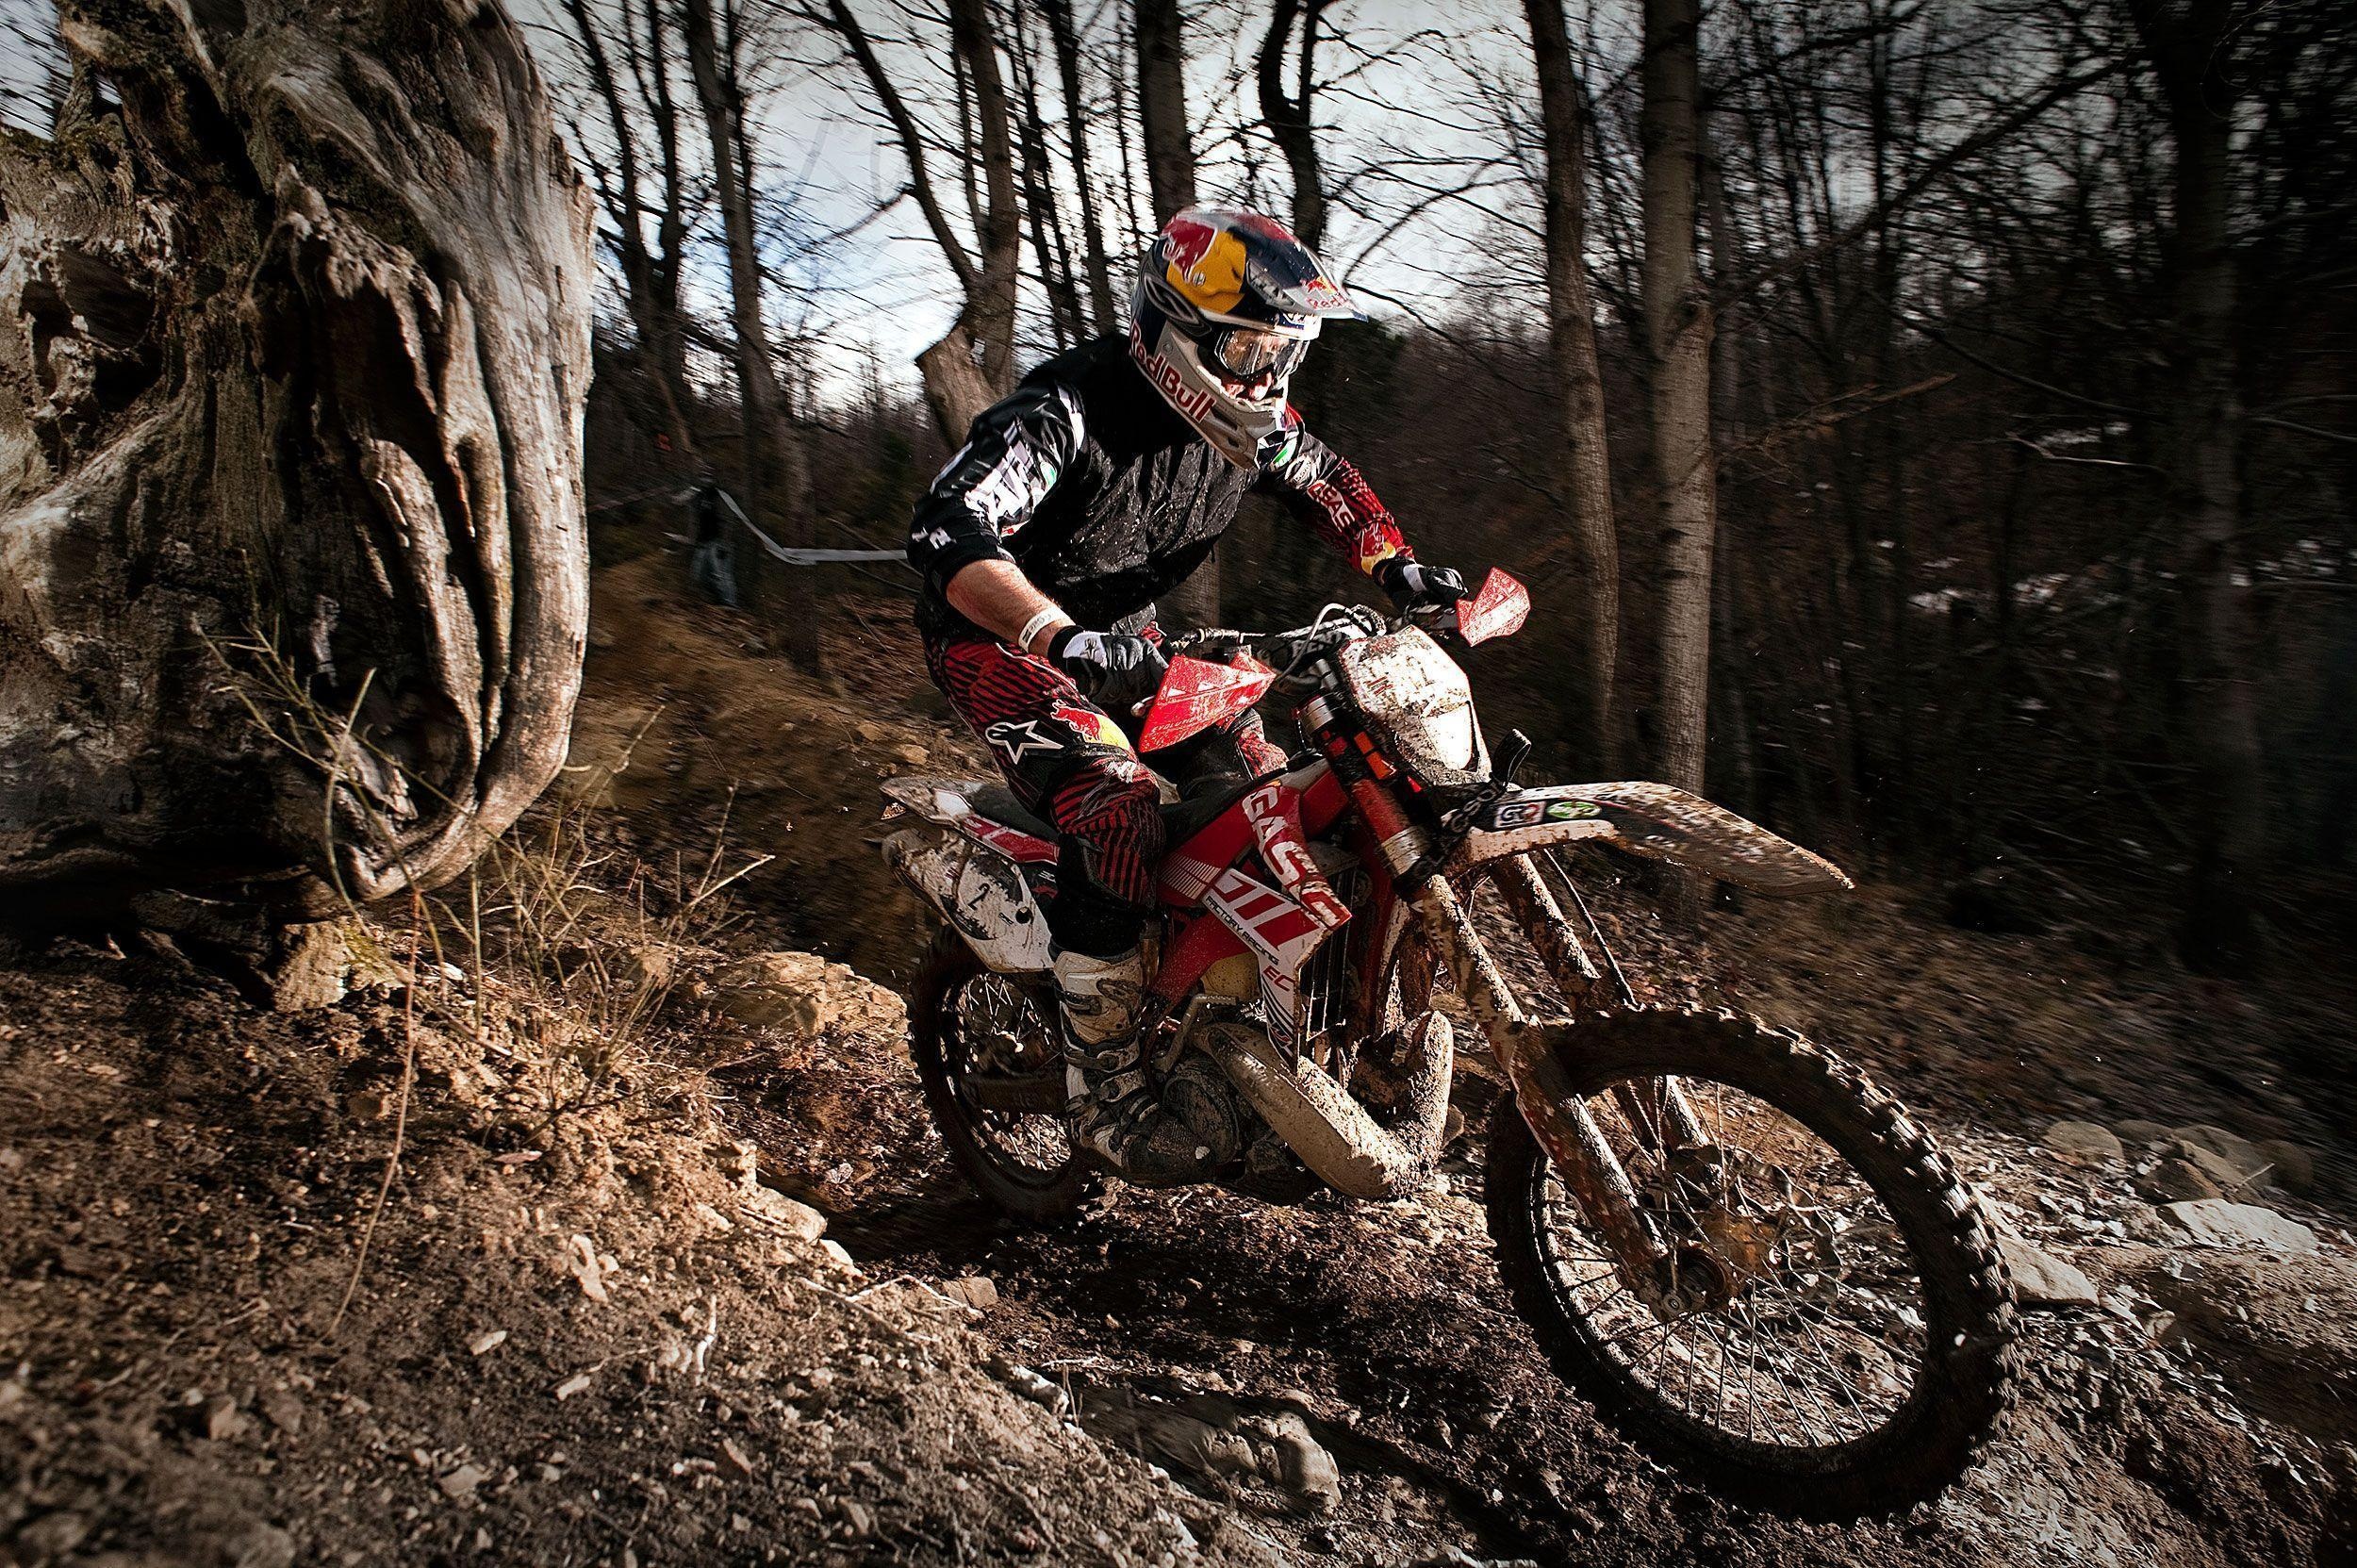 Enduro Motorbike: Dirt Race, Riding In The Mud, Racer, Extreme Conditions, Red Bull, Sponsor Logos. 2500x1670 HD Background.